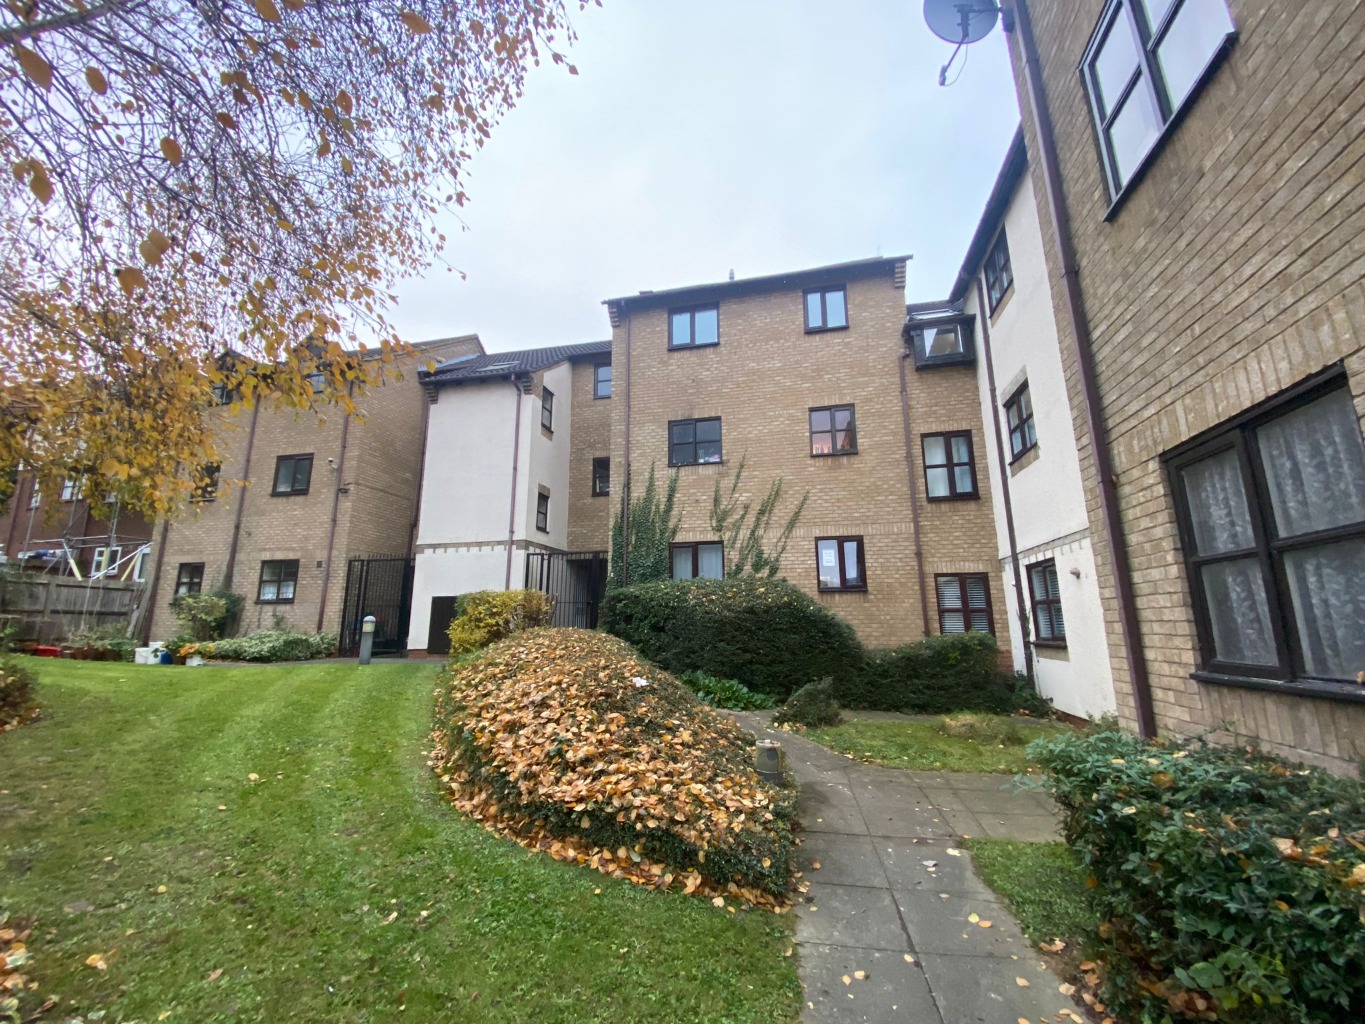 2 bed ground floor flat for sale in The Ridings, Luton, LU3 